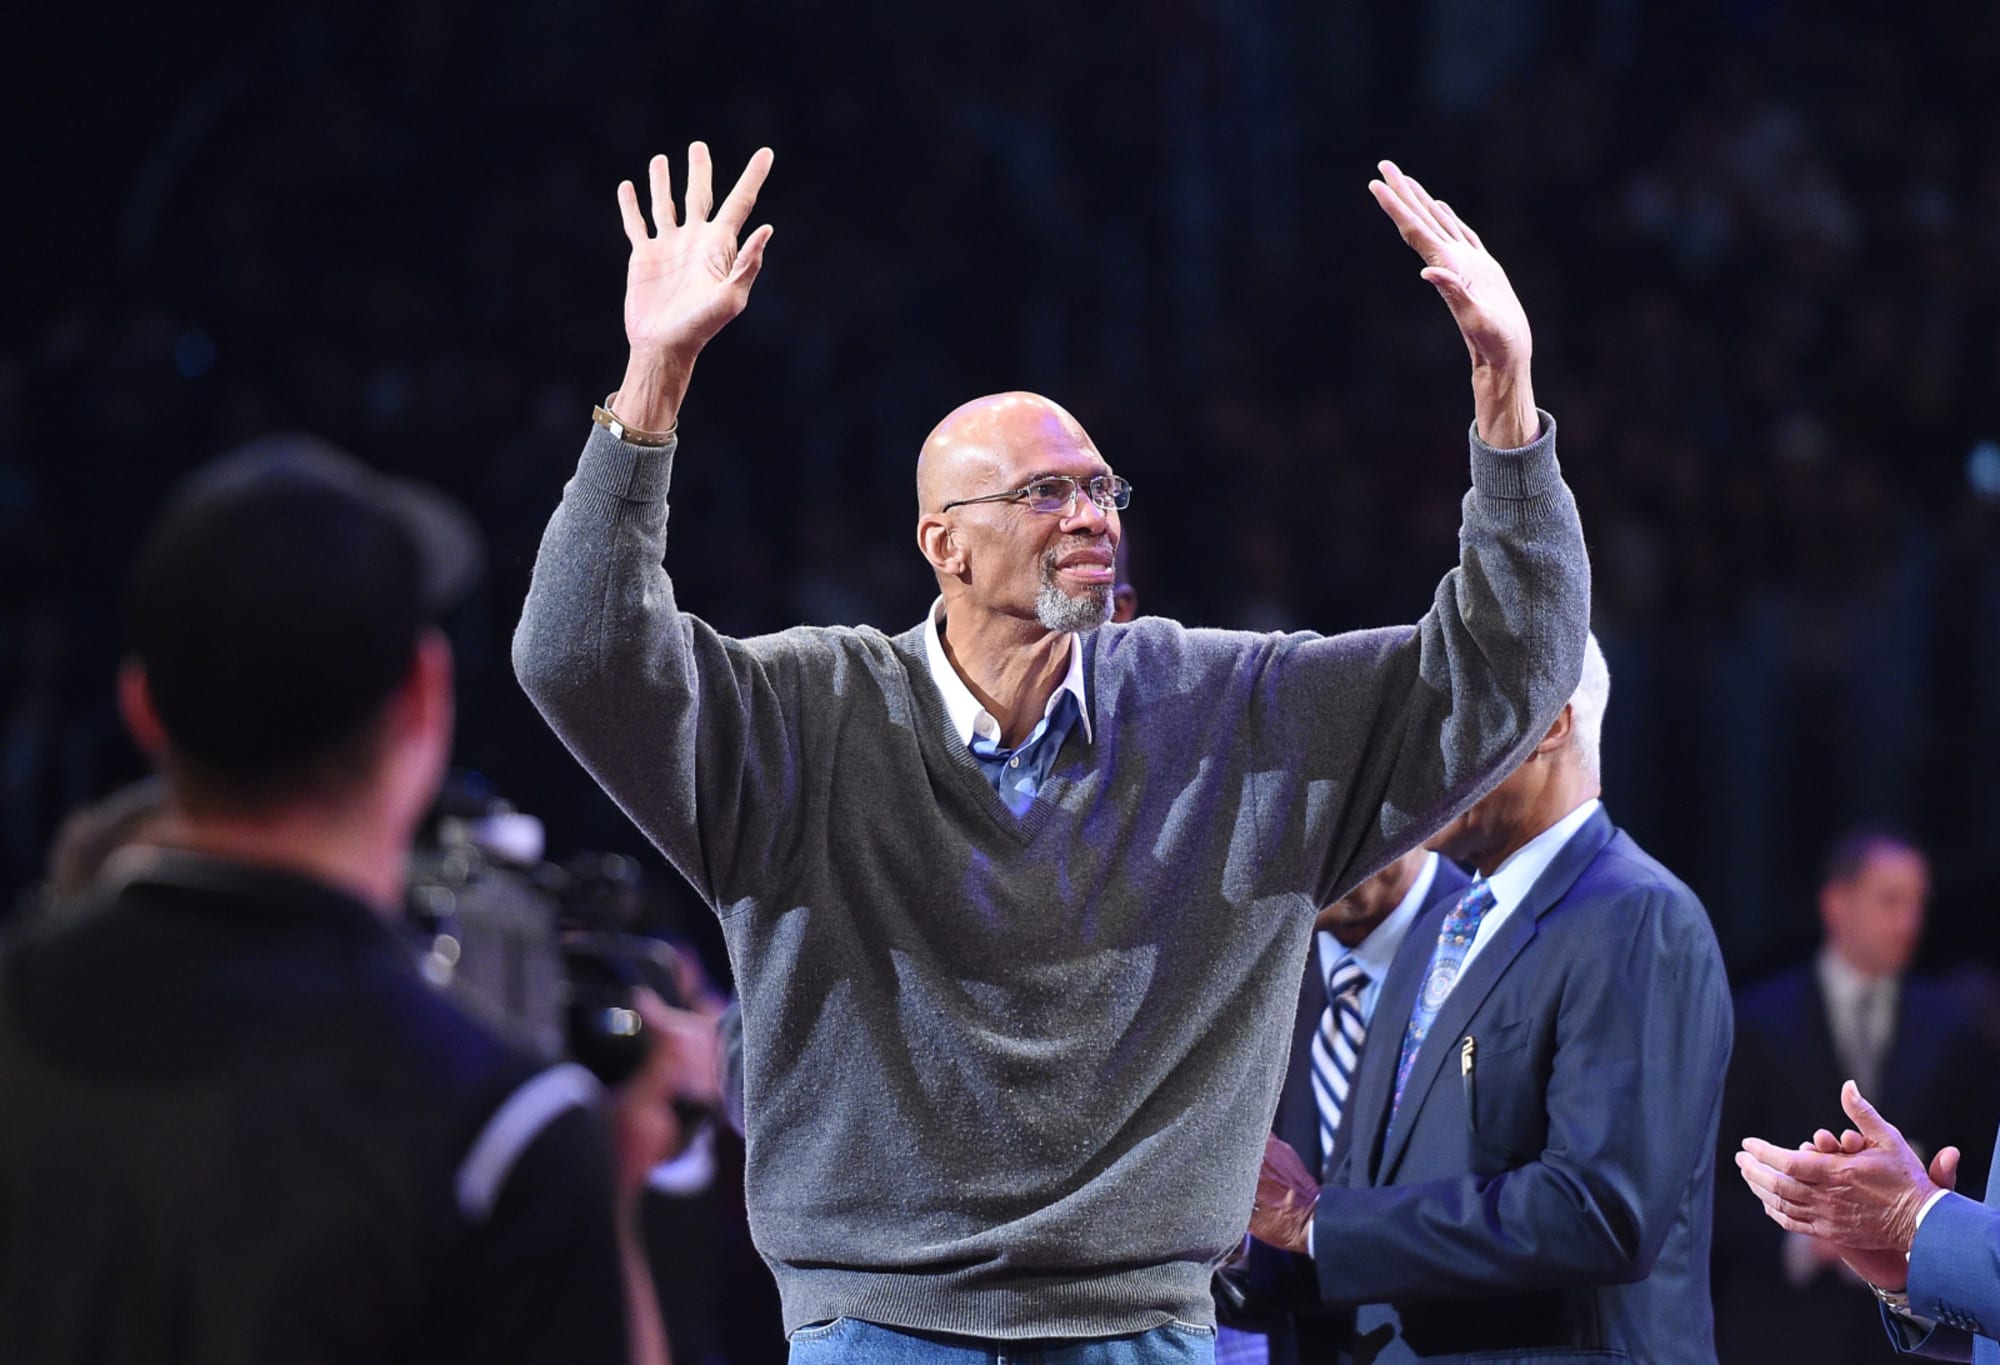 UCLA Basketball: Kareem Abdul-Jabbar is the Greatest Of All Time - Page 2